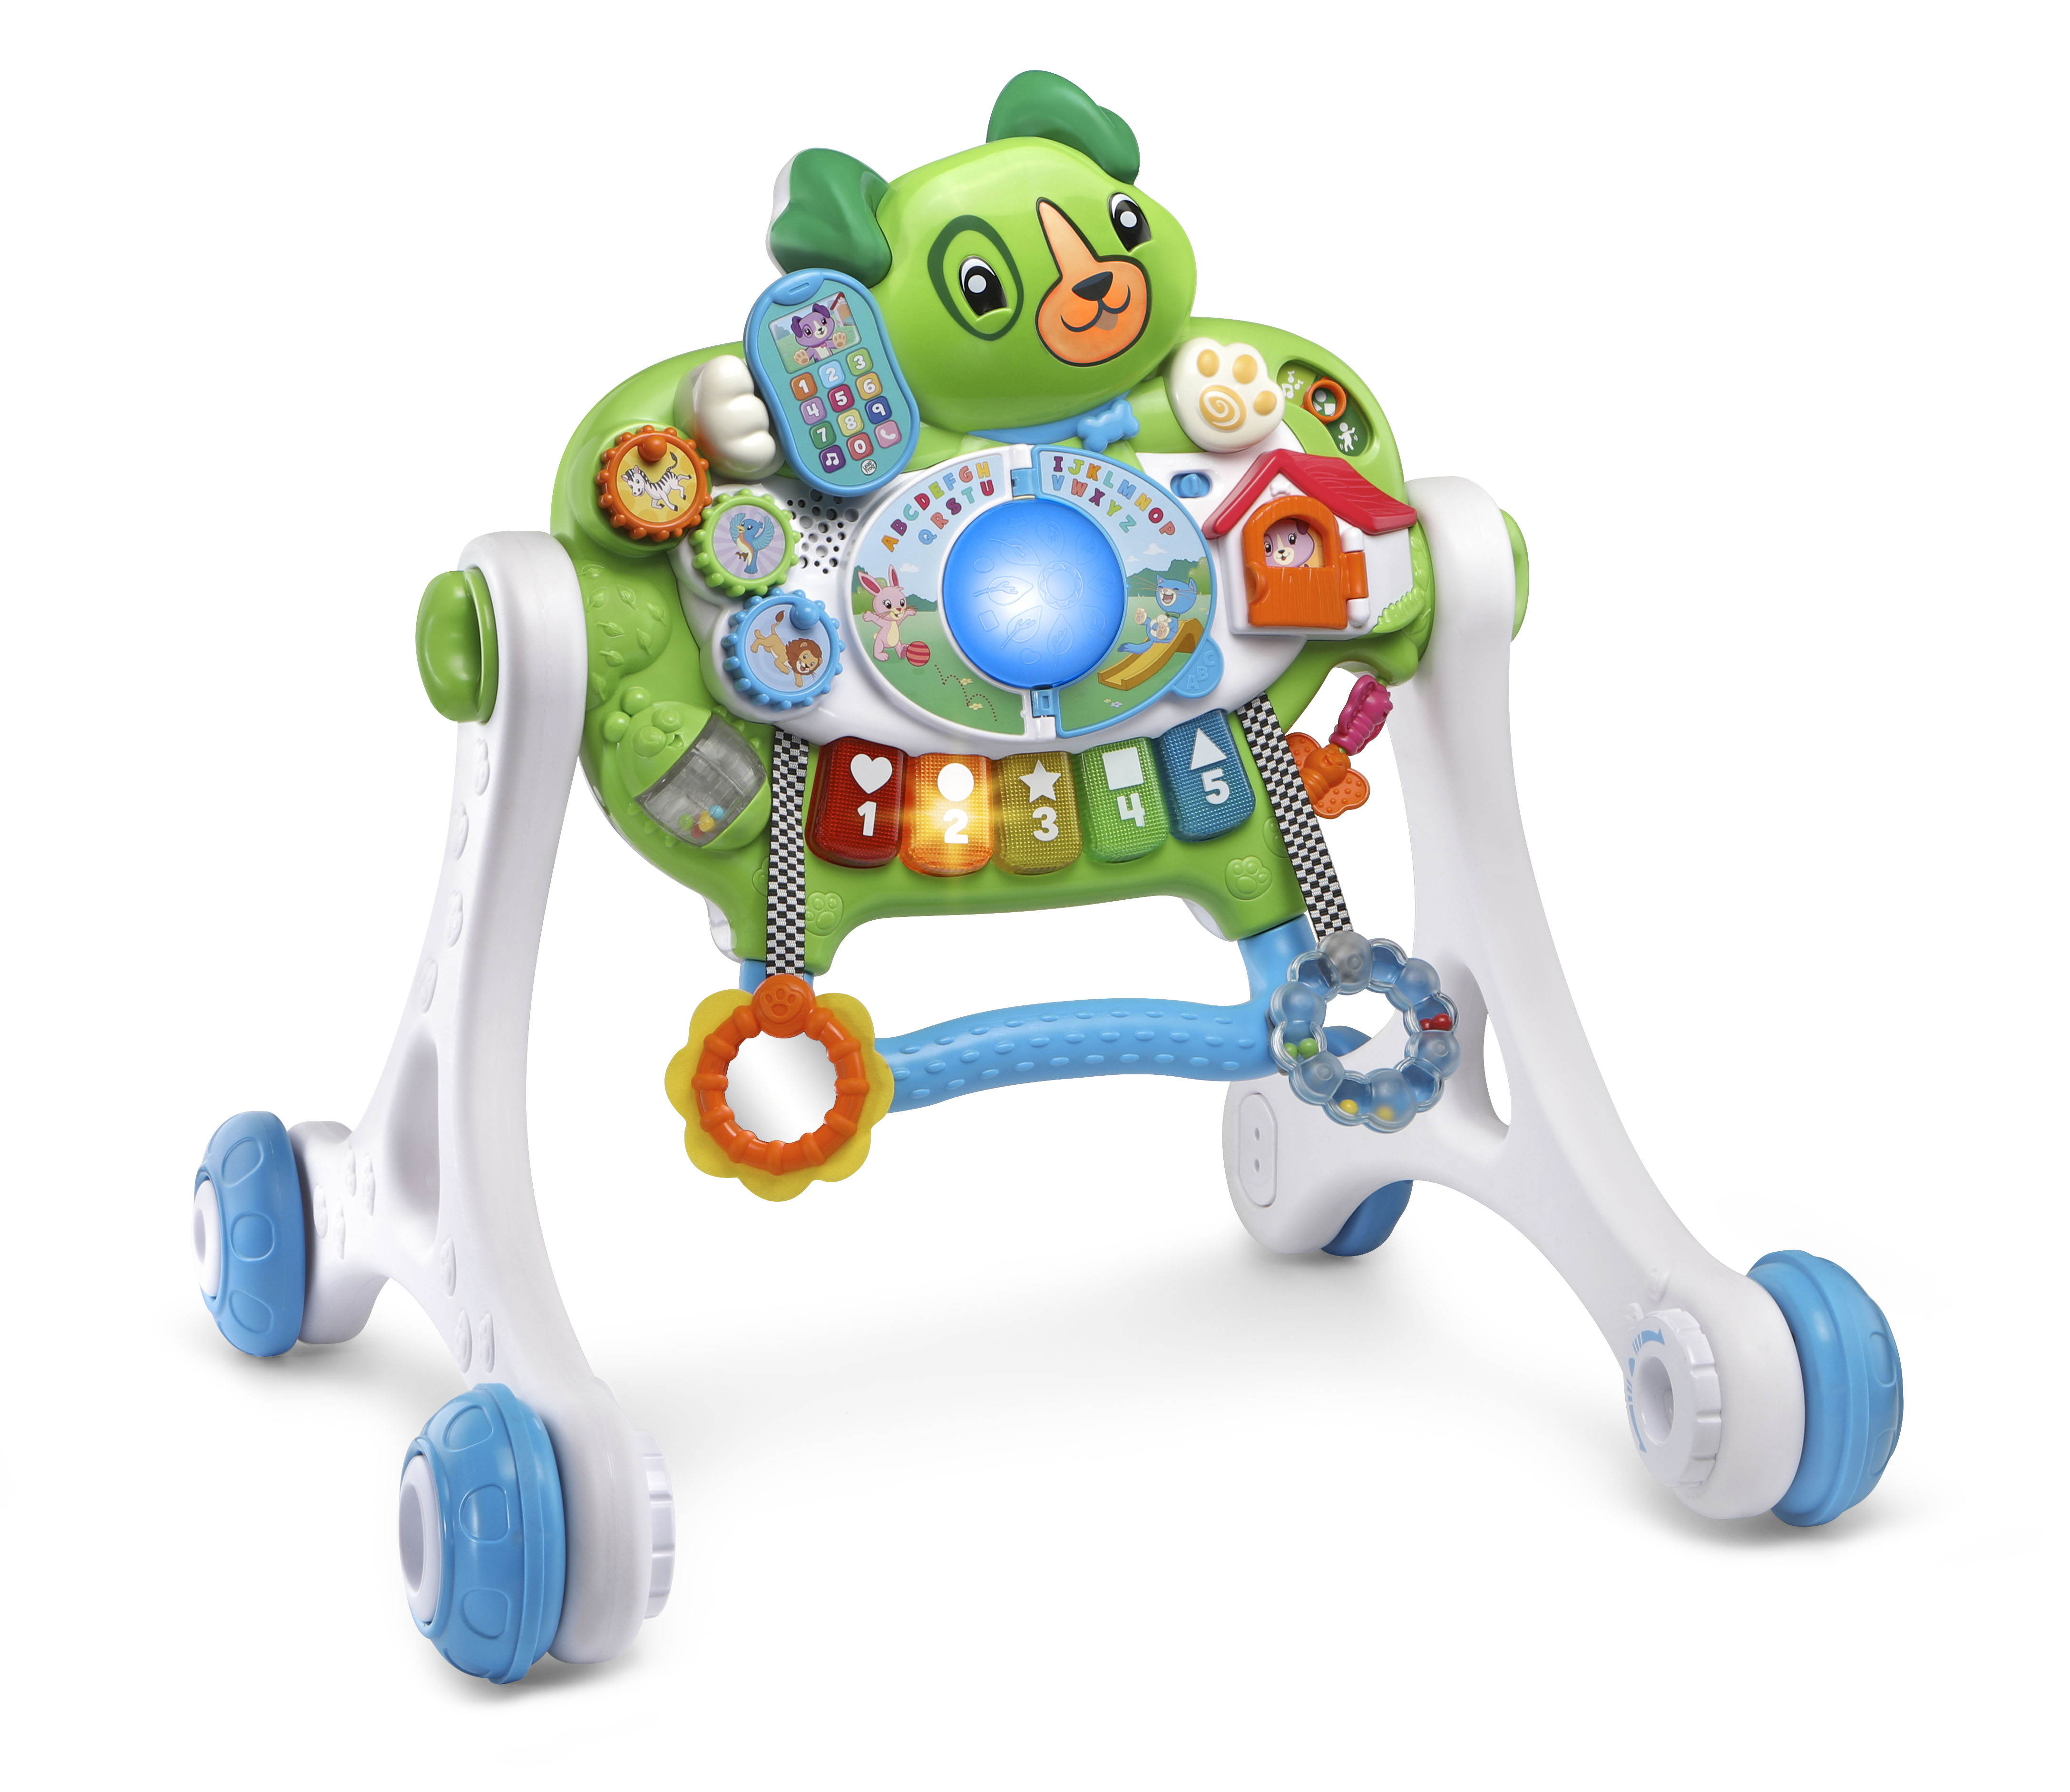 Scout's 3-in-1 Get Up and Go Walker, Baby Gym, Floor Play Toy, Green - image 3 of 11